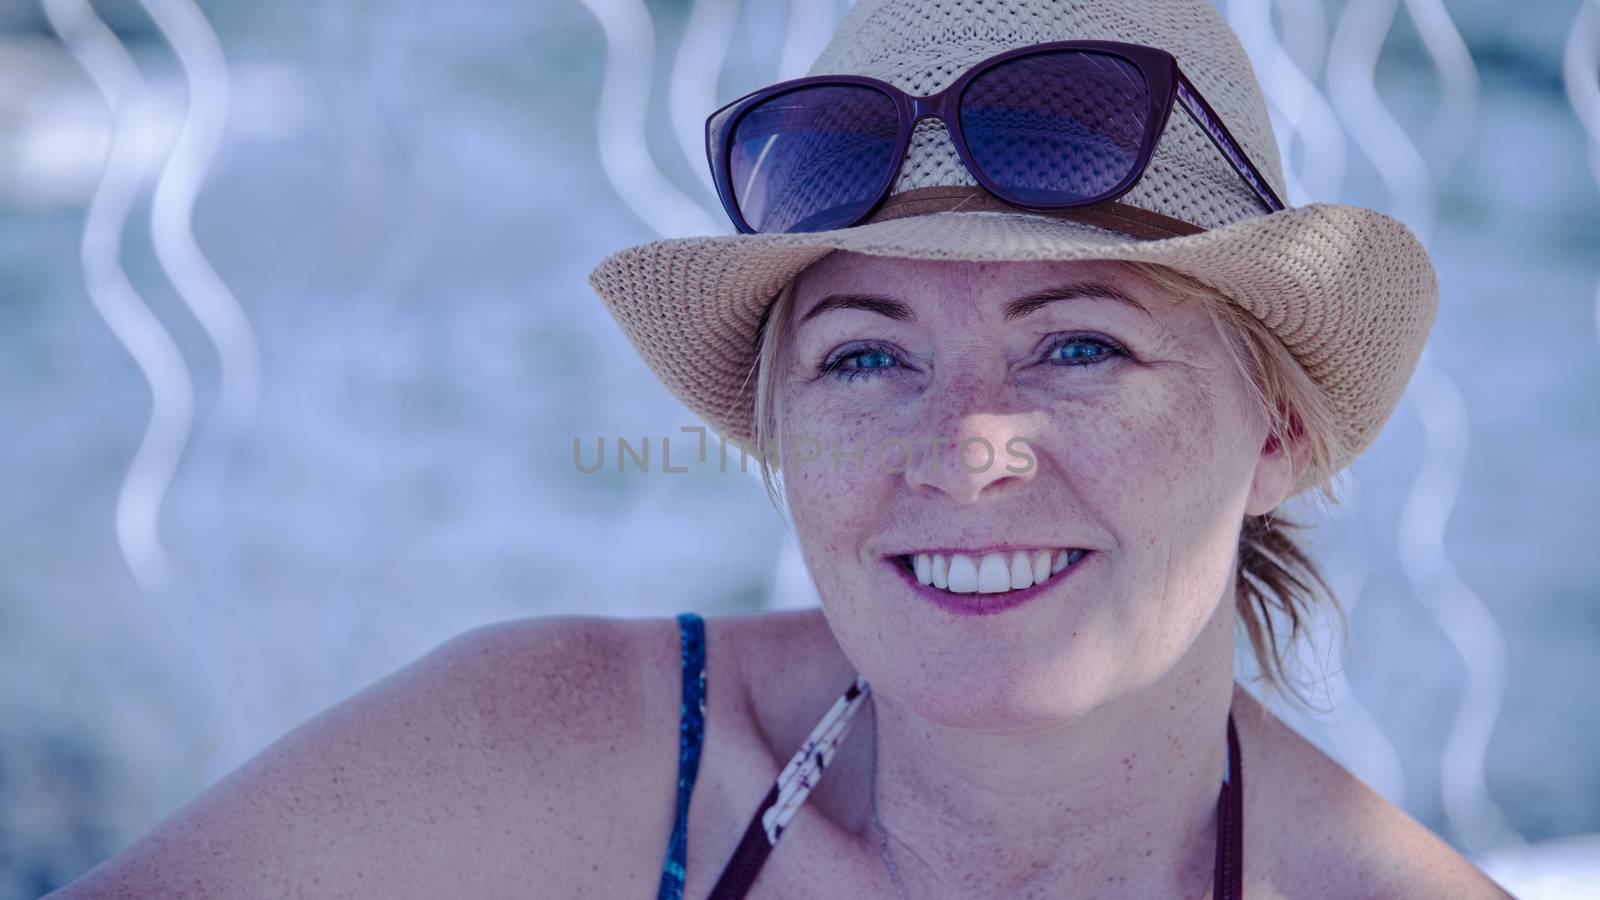 Croatia, Hvar - June 2018: Woman, caucasian, mid 40's, wearing a hat and sunglasses on her head sitting in the shade at beach resort	